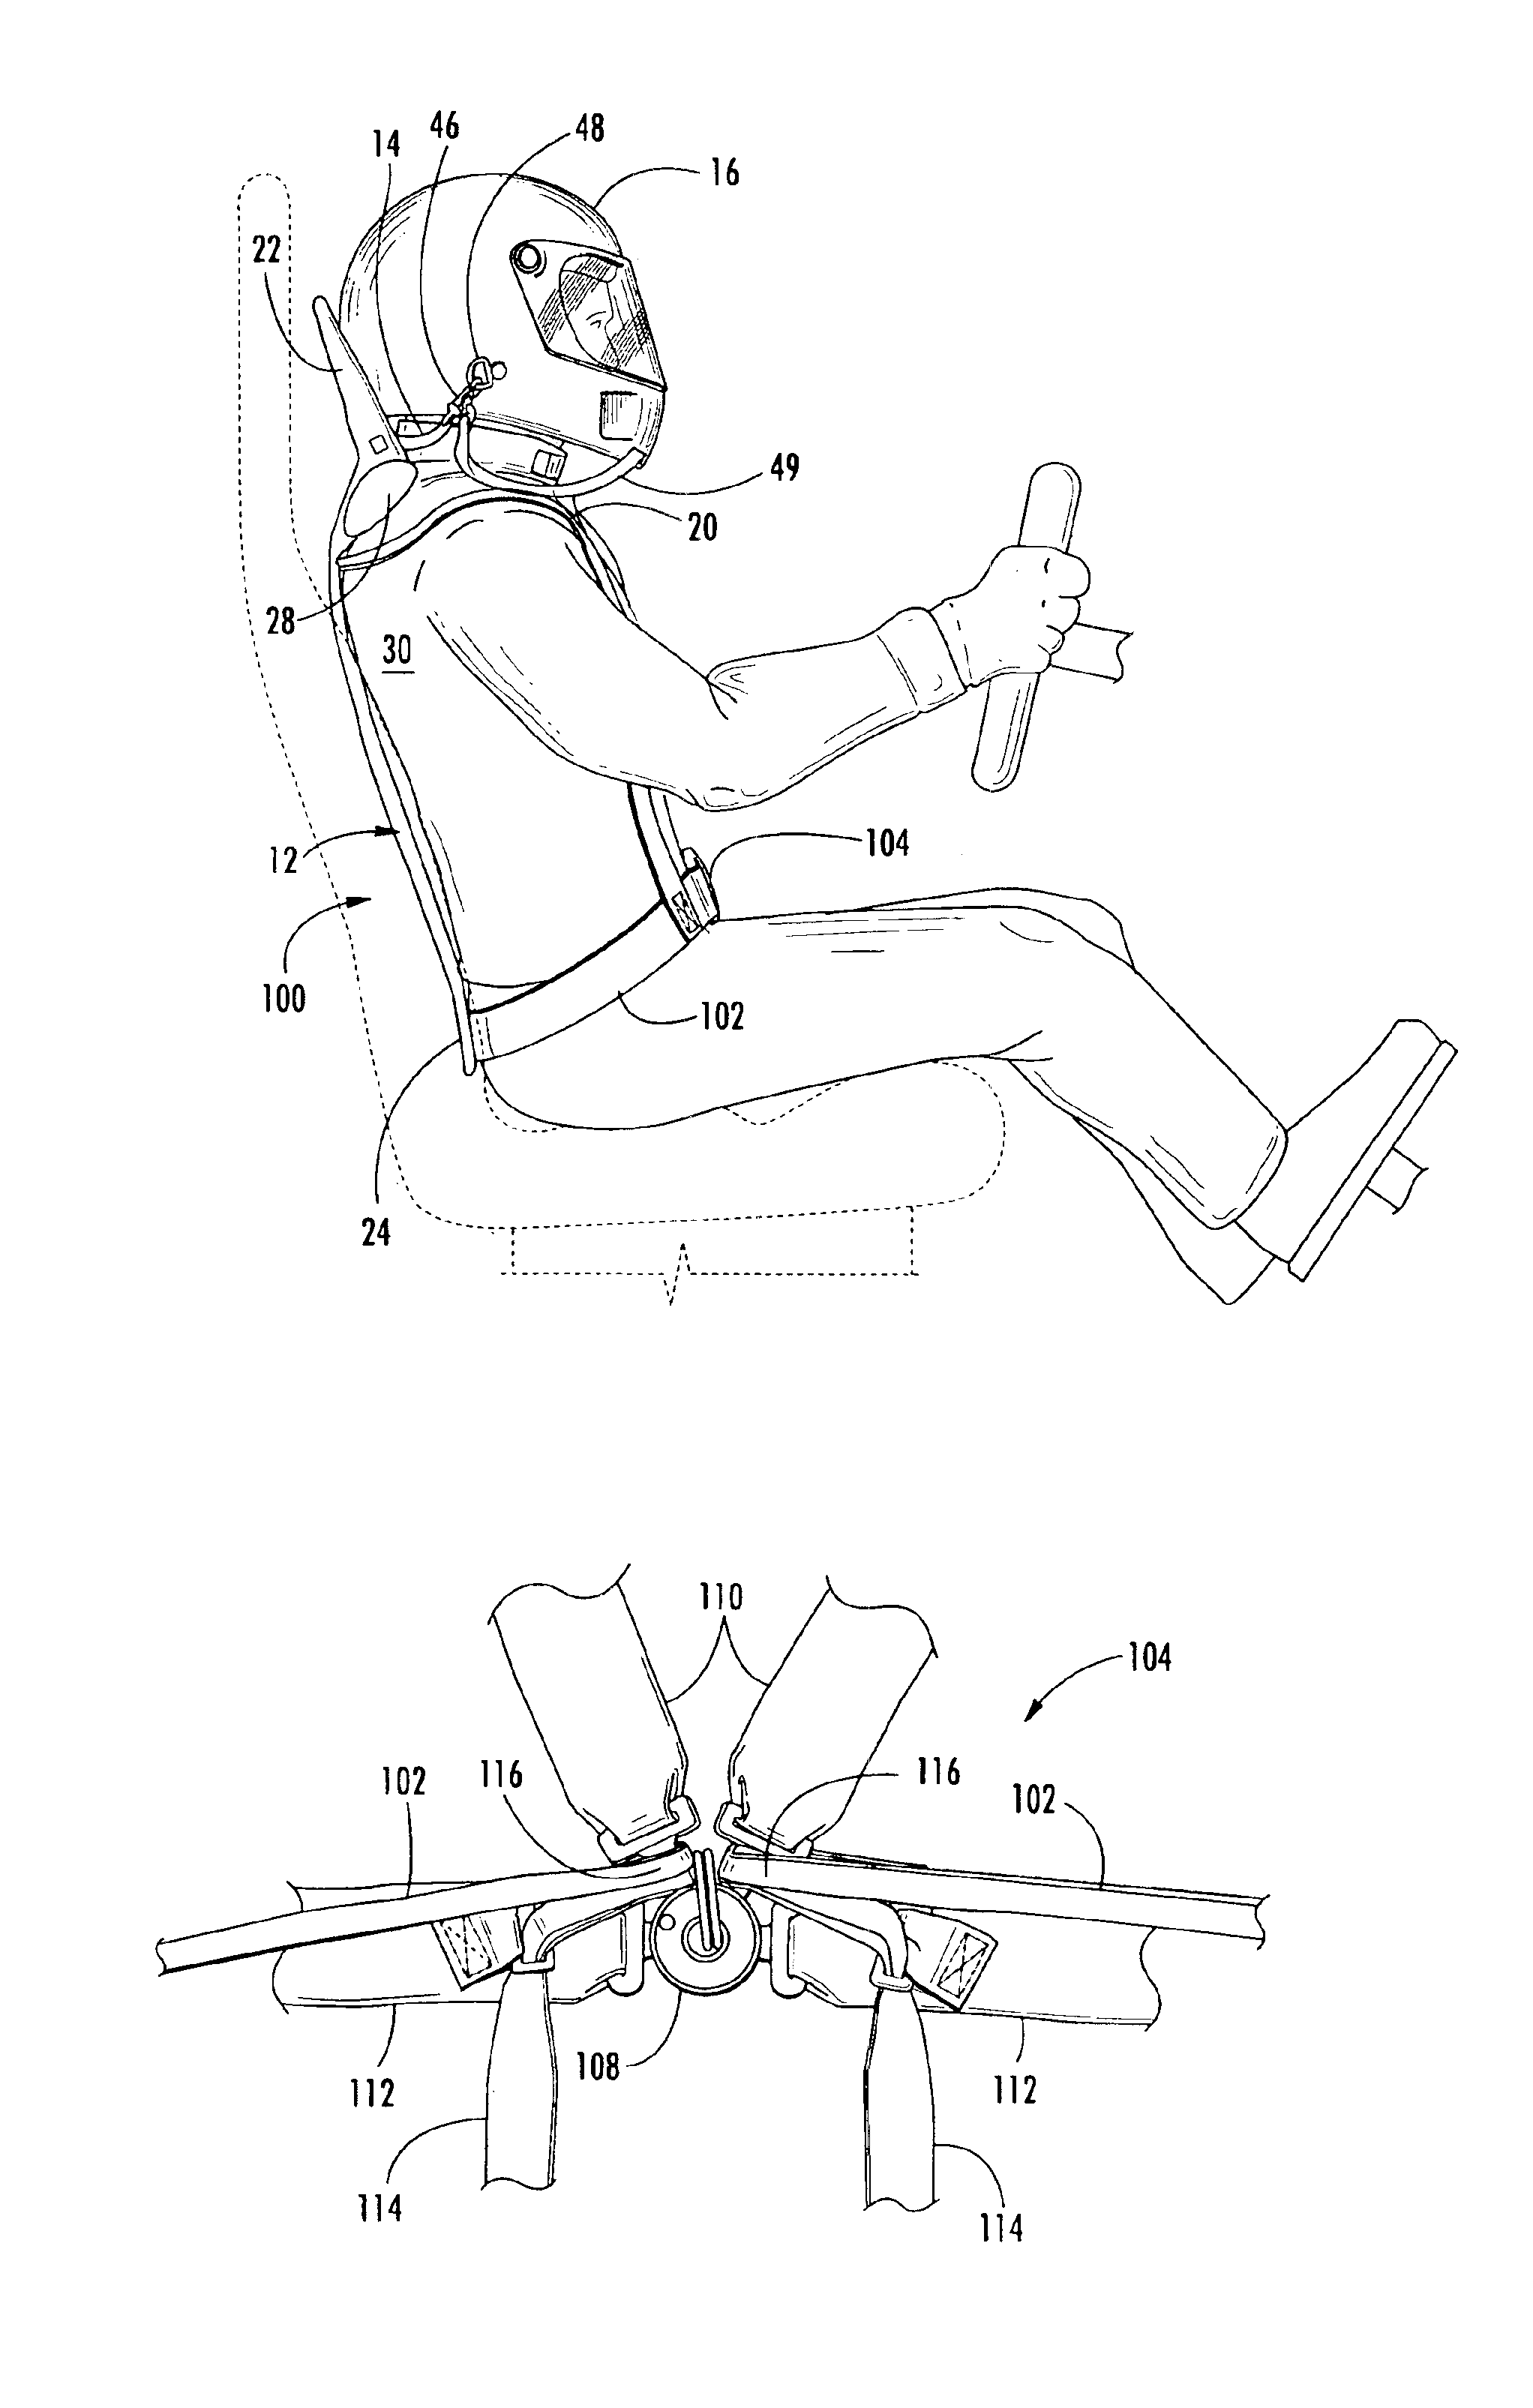 Head restraint device with rigid member for use with a high-performance vehicle